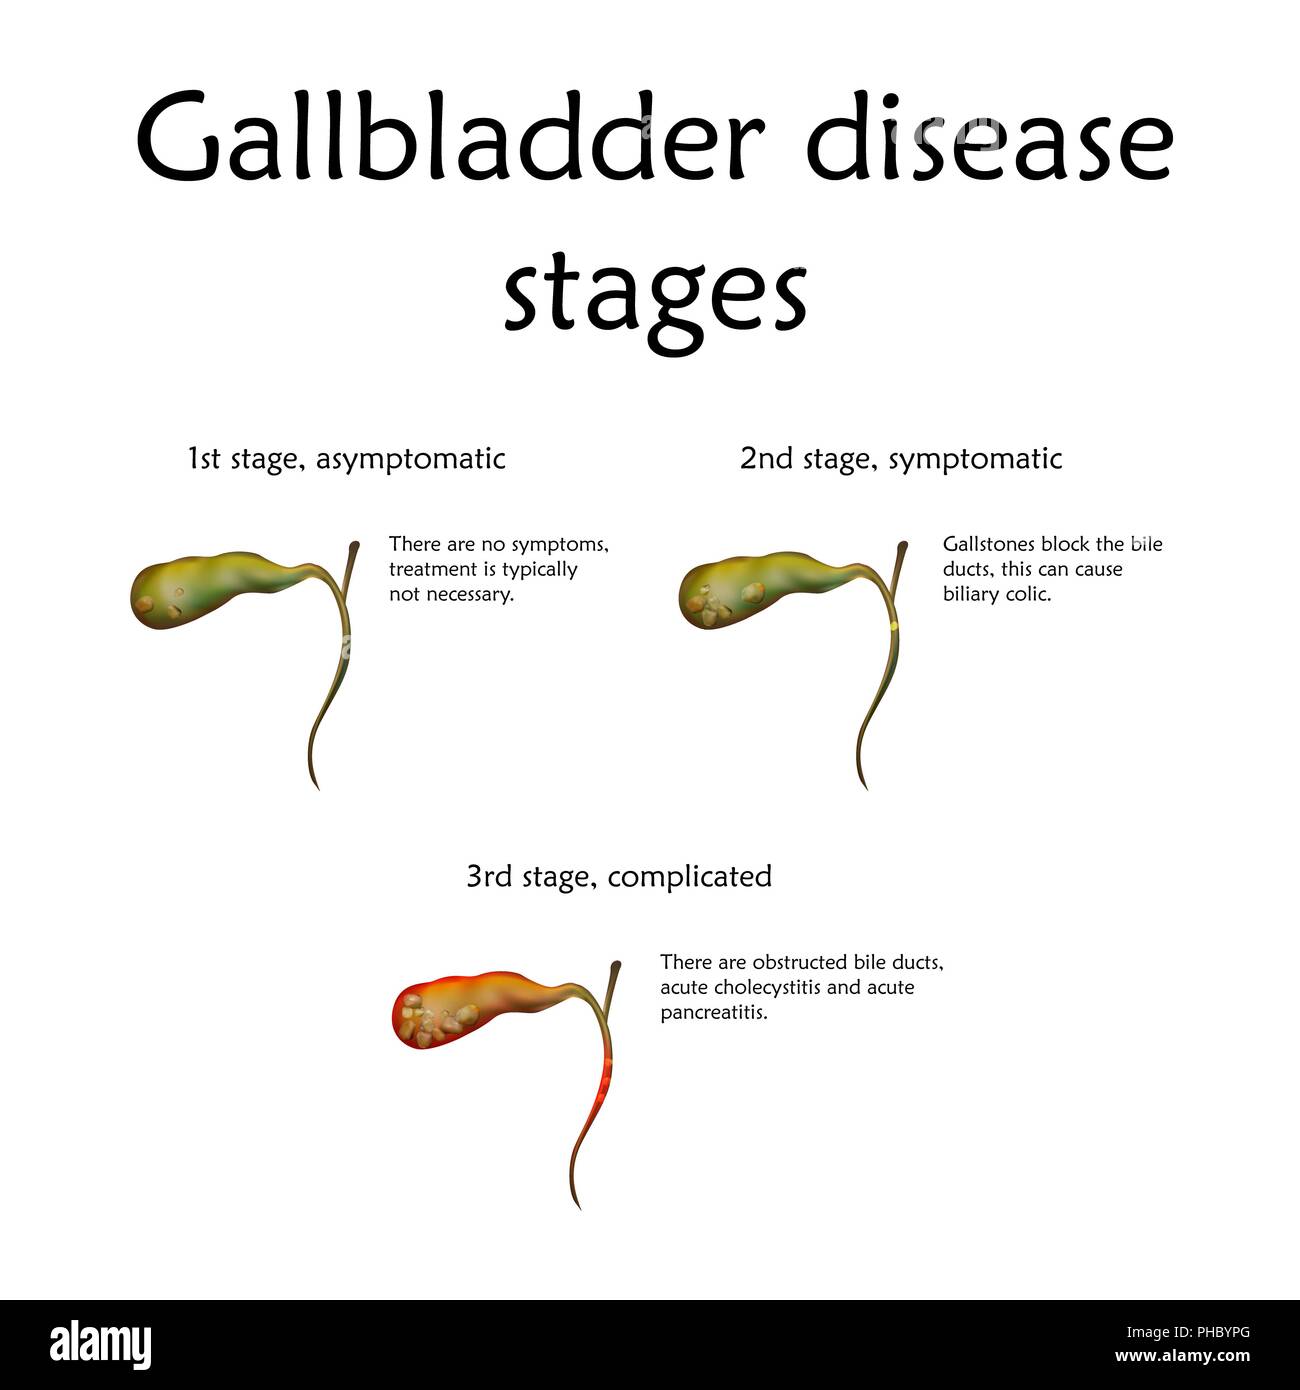 Gallbladder Disease Stages Illustration The Stages Include